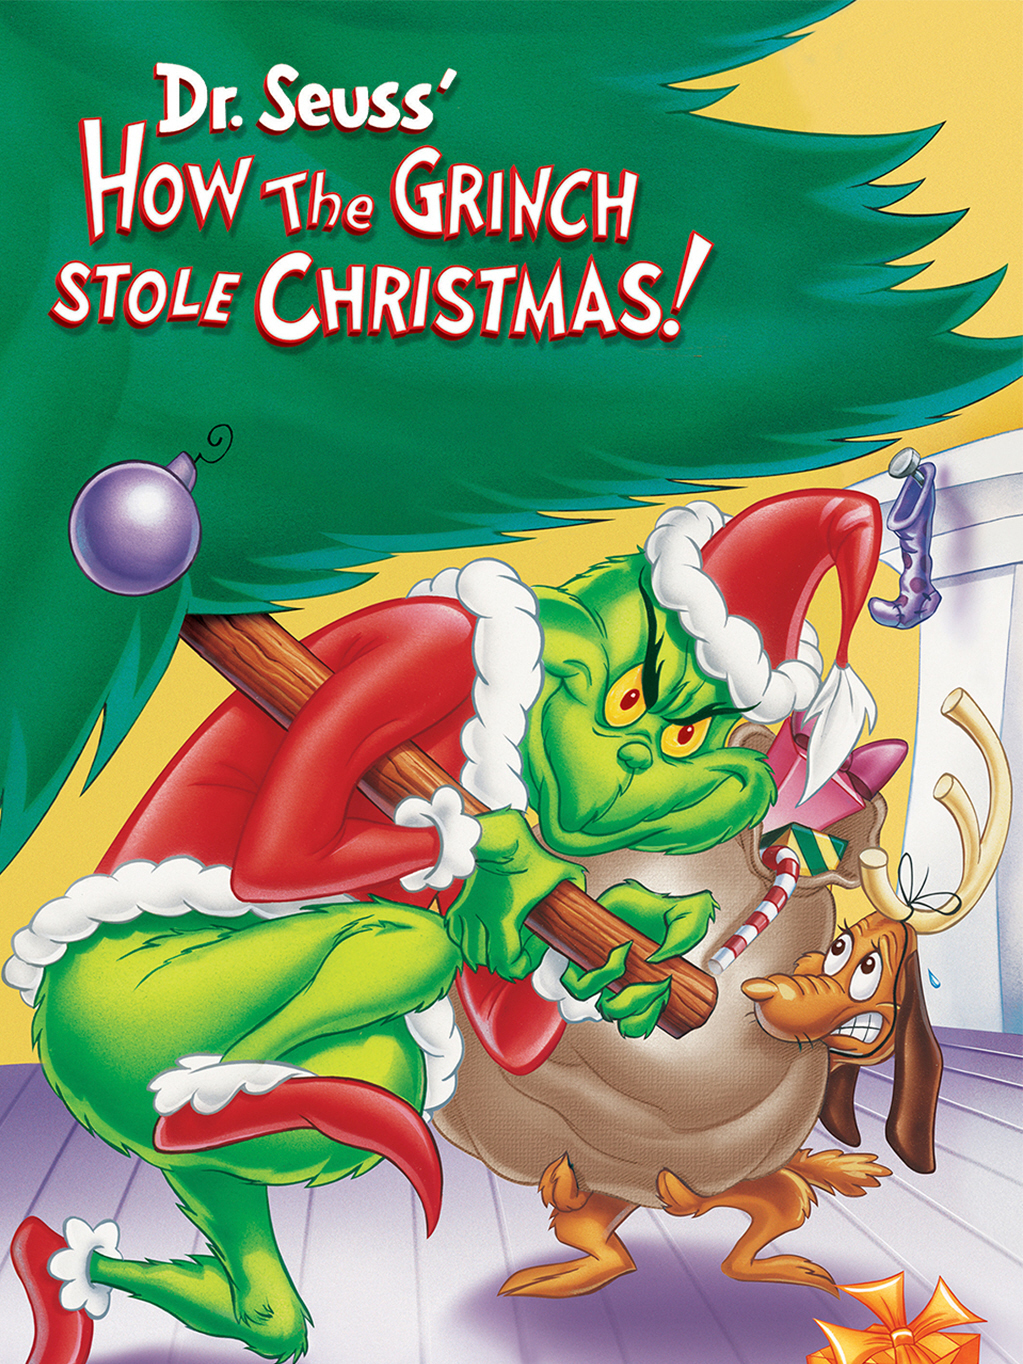 How the Grinch Stole Christmas (the original)